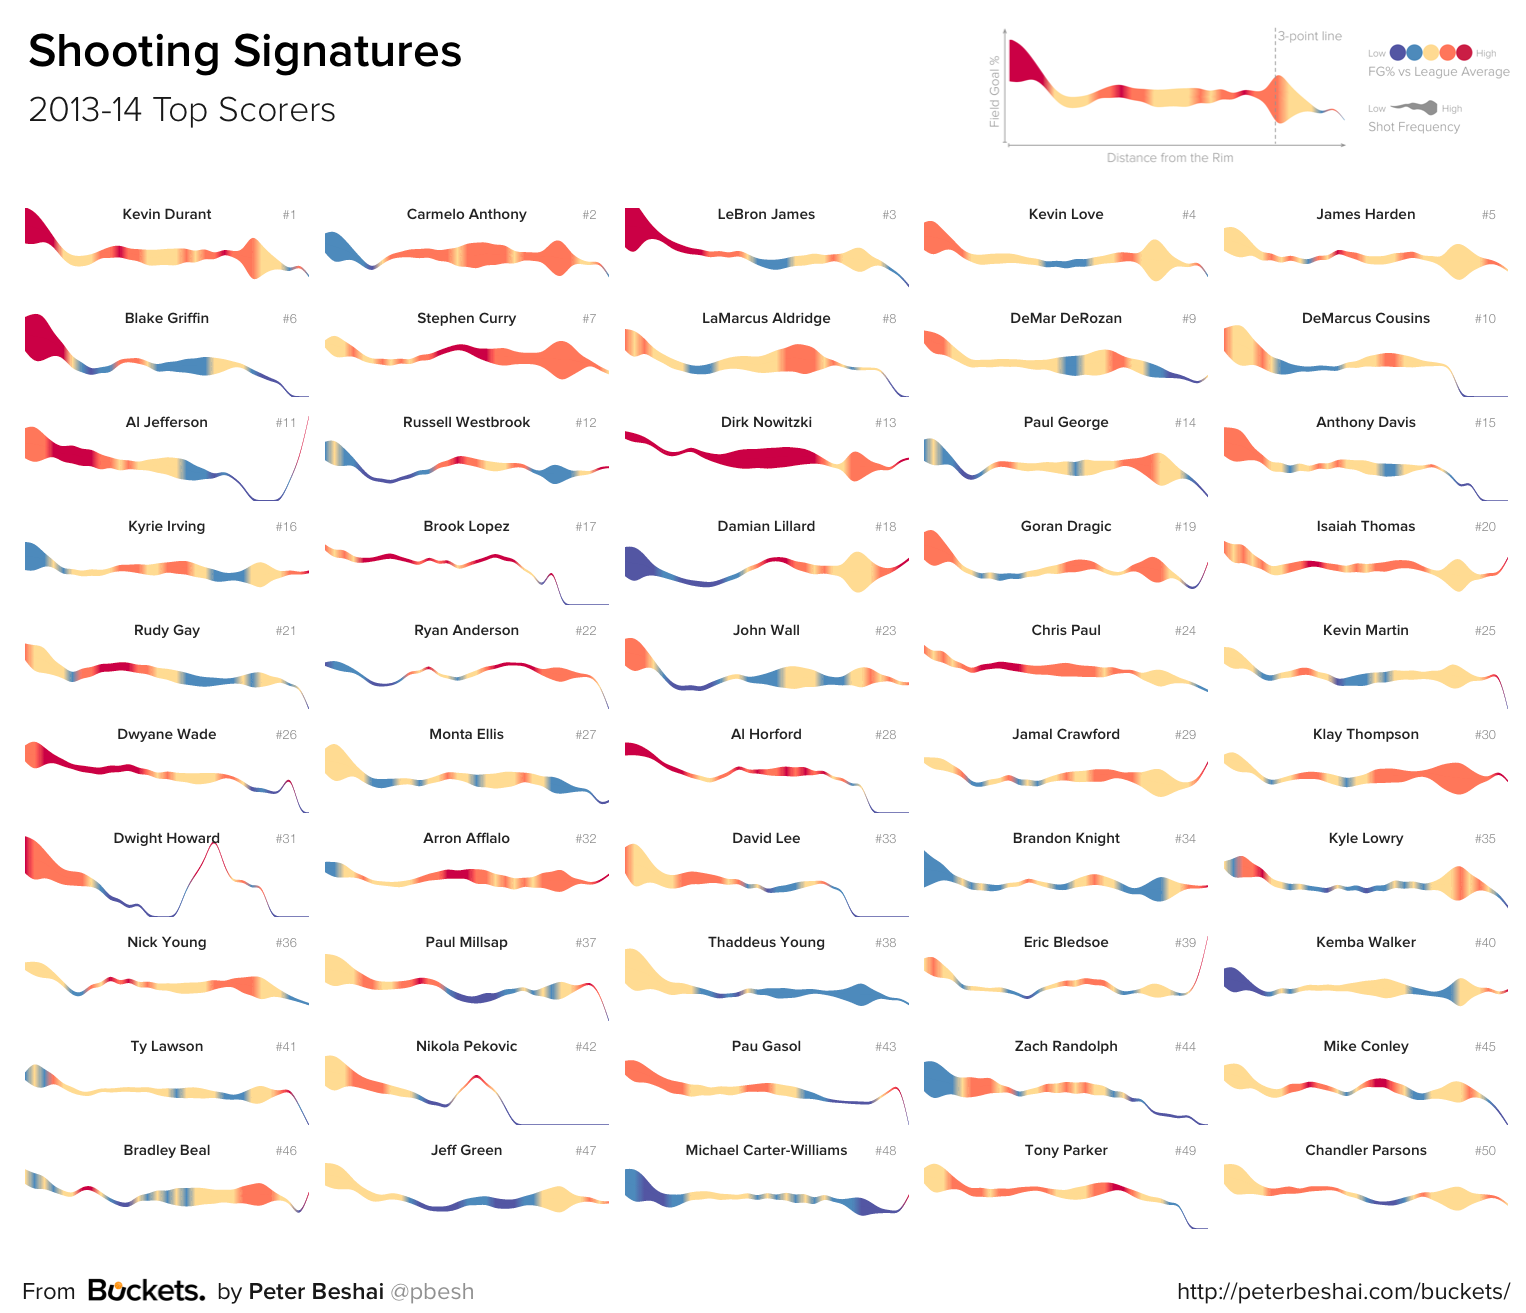 Shooting Signatures of NBA Players from the 2013-14 Season